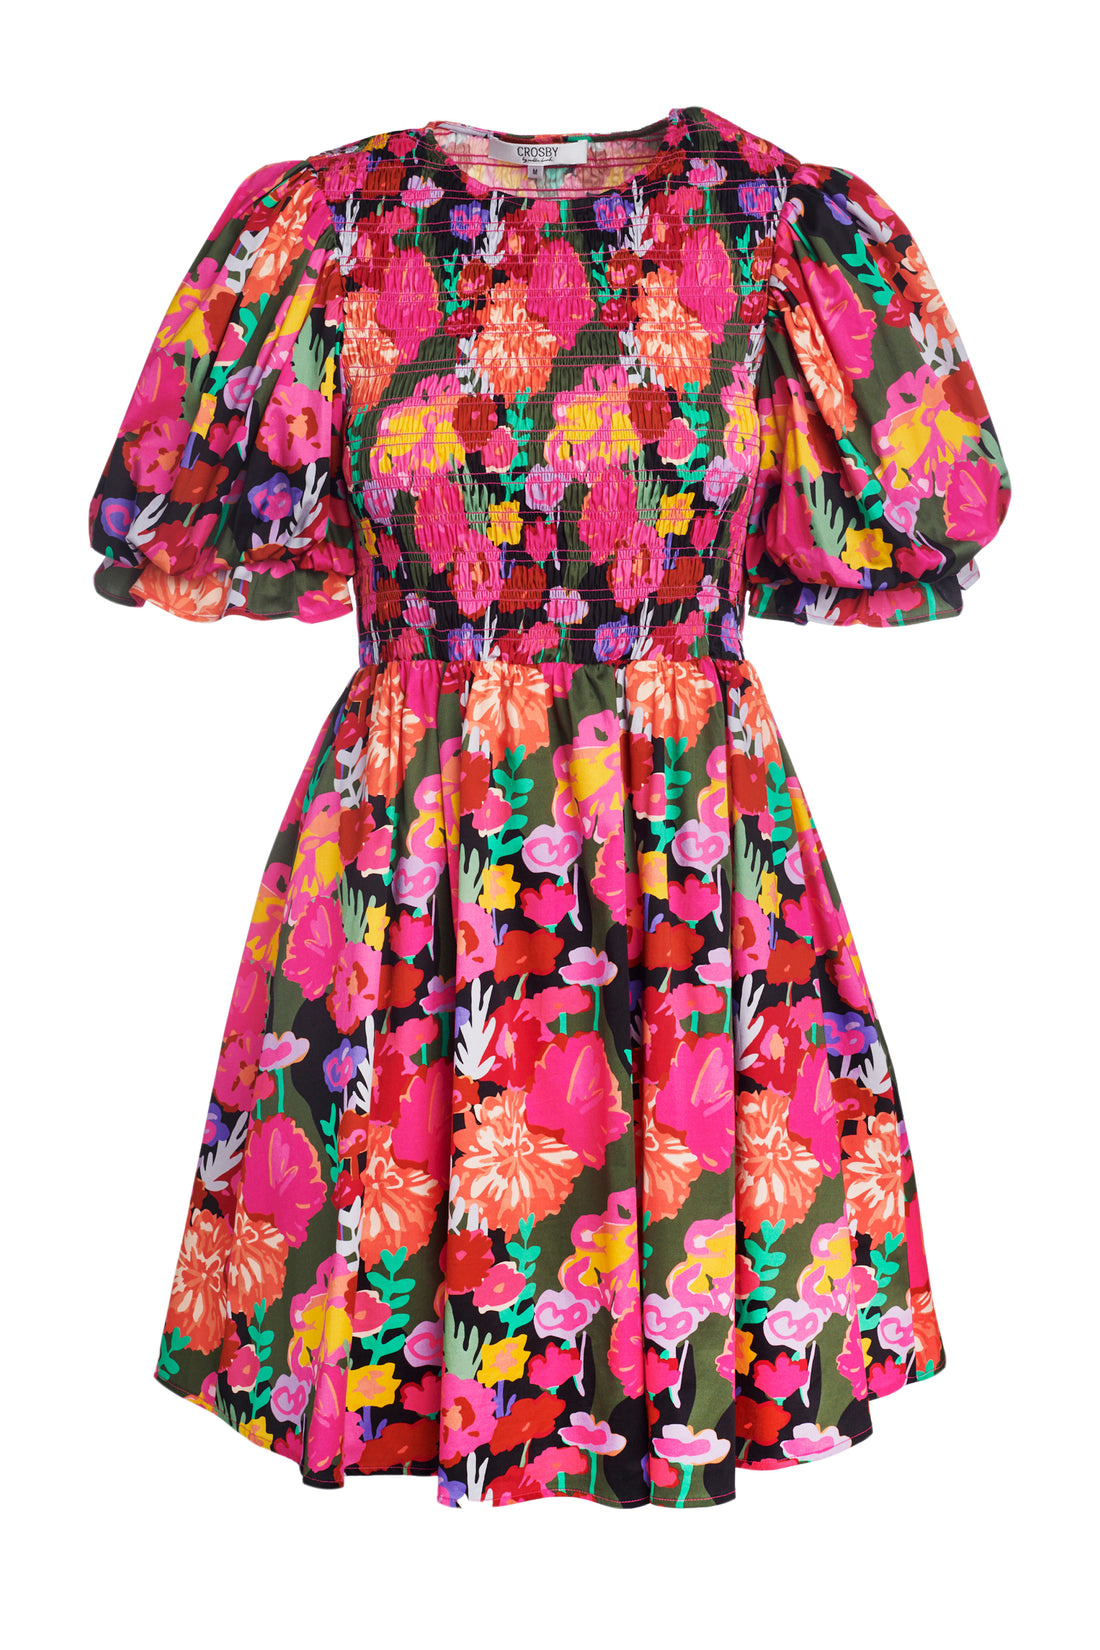 Crosby By Mollie Burch Lizzy Dress Floral Forest